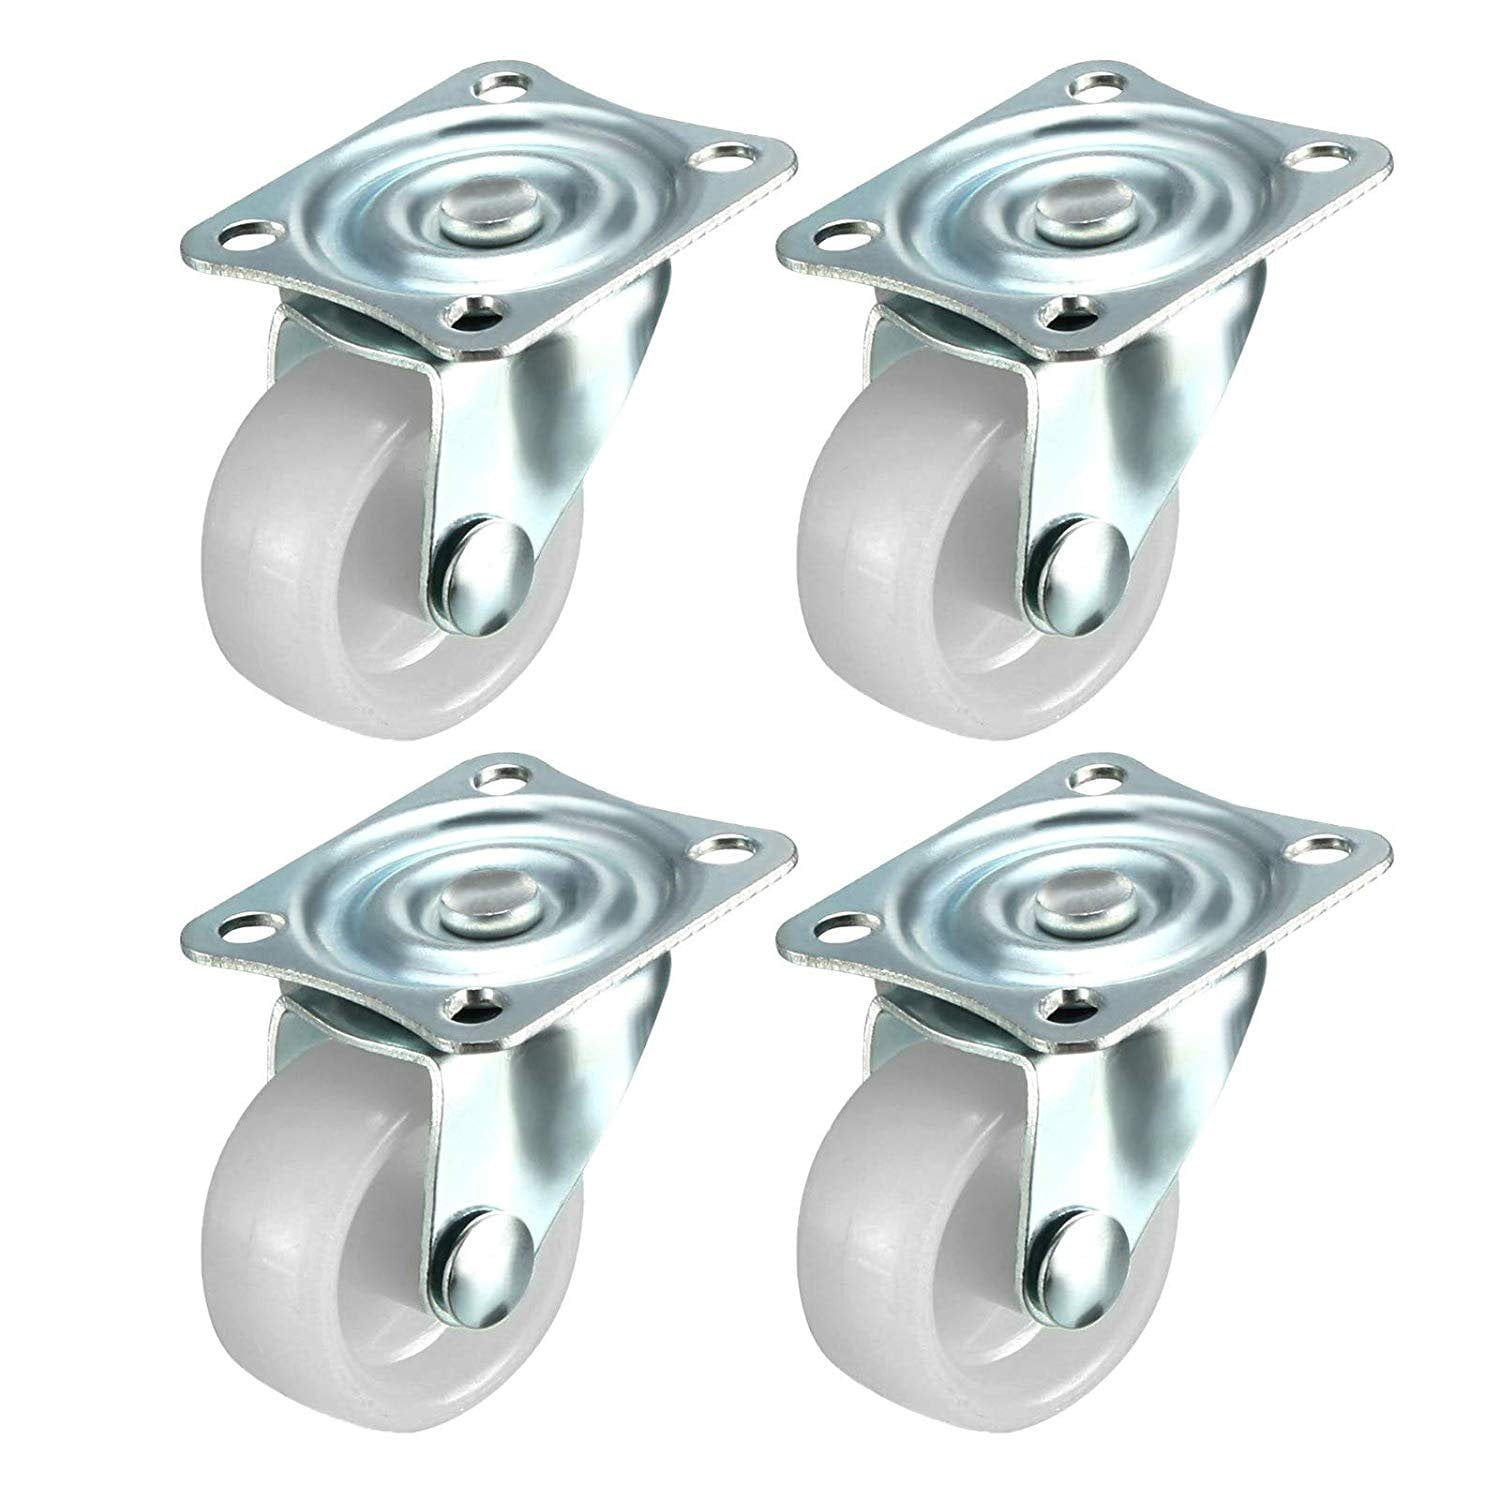 25mm Metal Top Plate Mounted Swivel Furniture Wheels Caster With Heavy Duty 